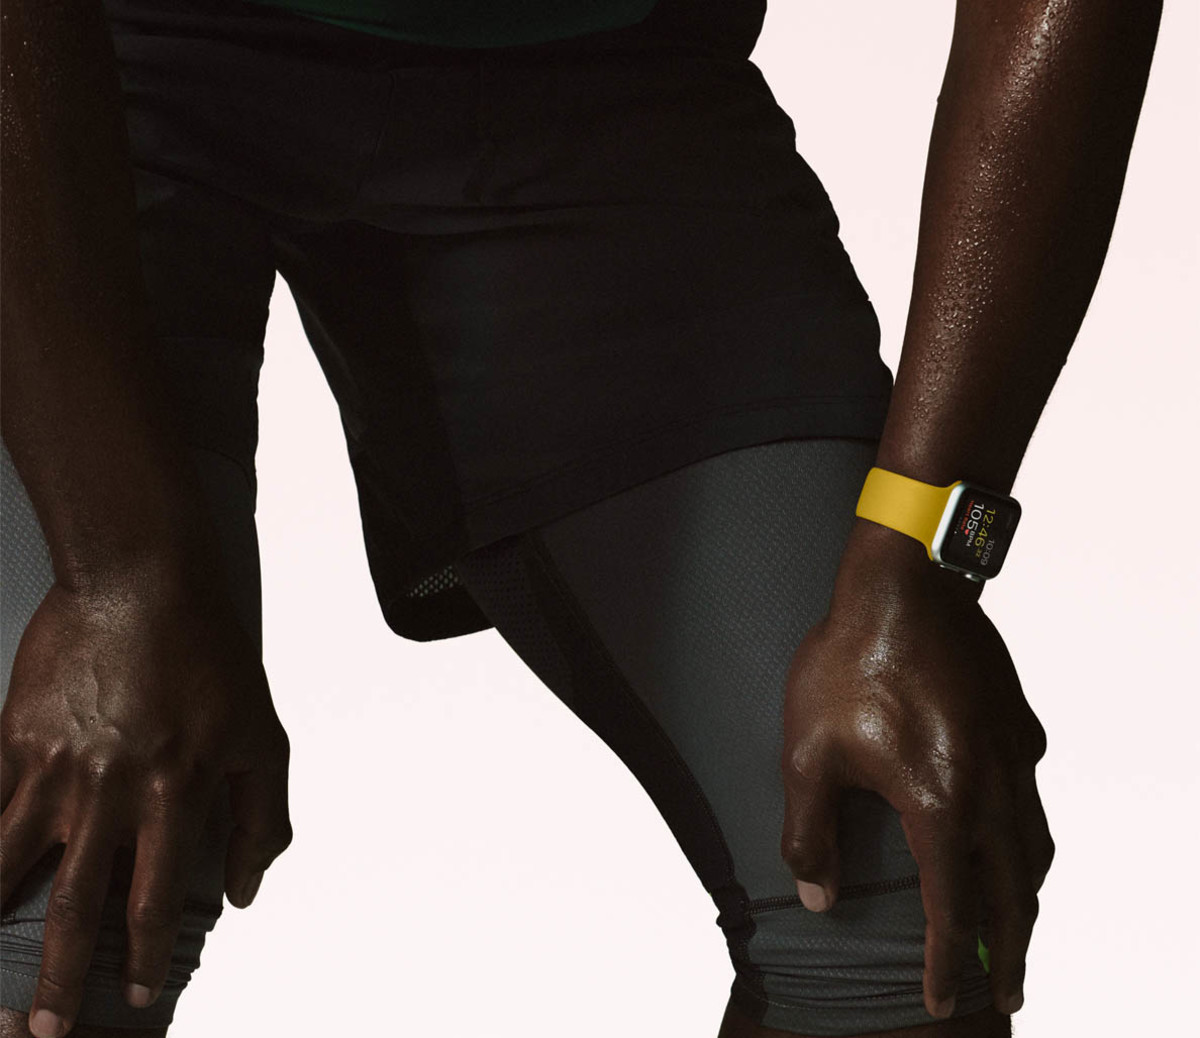 Apple's new nylon band for the Apple Watch.